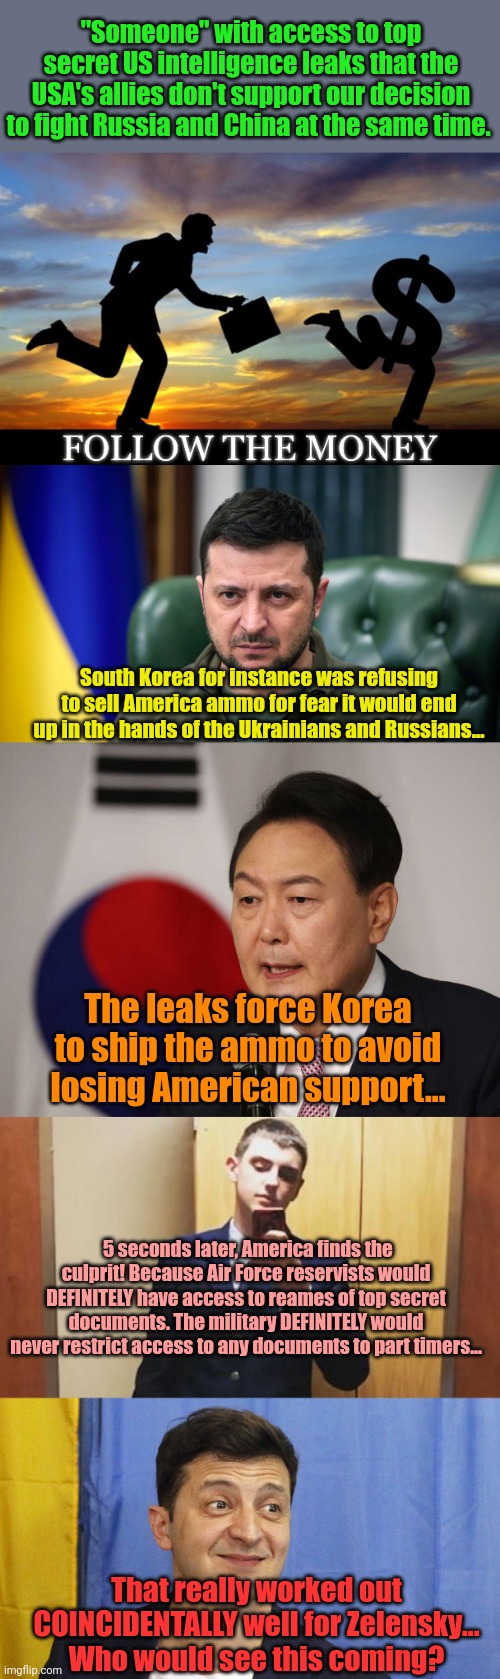 Blackmail keeps working out so well... | "Someone" with access to top secret US intelligence leaks that the USA's allies don't support our decision to fight Russia and China at the same time. South Korea for instance was refusing to sell America ammo for fear it would end up in the hands of the Ukrainians and Russians... The leaks force Korea to ship the ammo to avoid losing American support... 5 seconds later, America finds the culprit! Because Air Force reservists would DEFINITELY have access to reames of top secret documents. The military DEFINITELY would never restrict access to any documents to part timers... That really worked out COINCIDENTALLY well for Zelensky...
Who would see this coming? | image tagged in follow the money,selensky,with friends like these | made w/ Imgflip meme maker